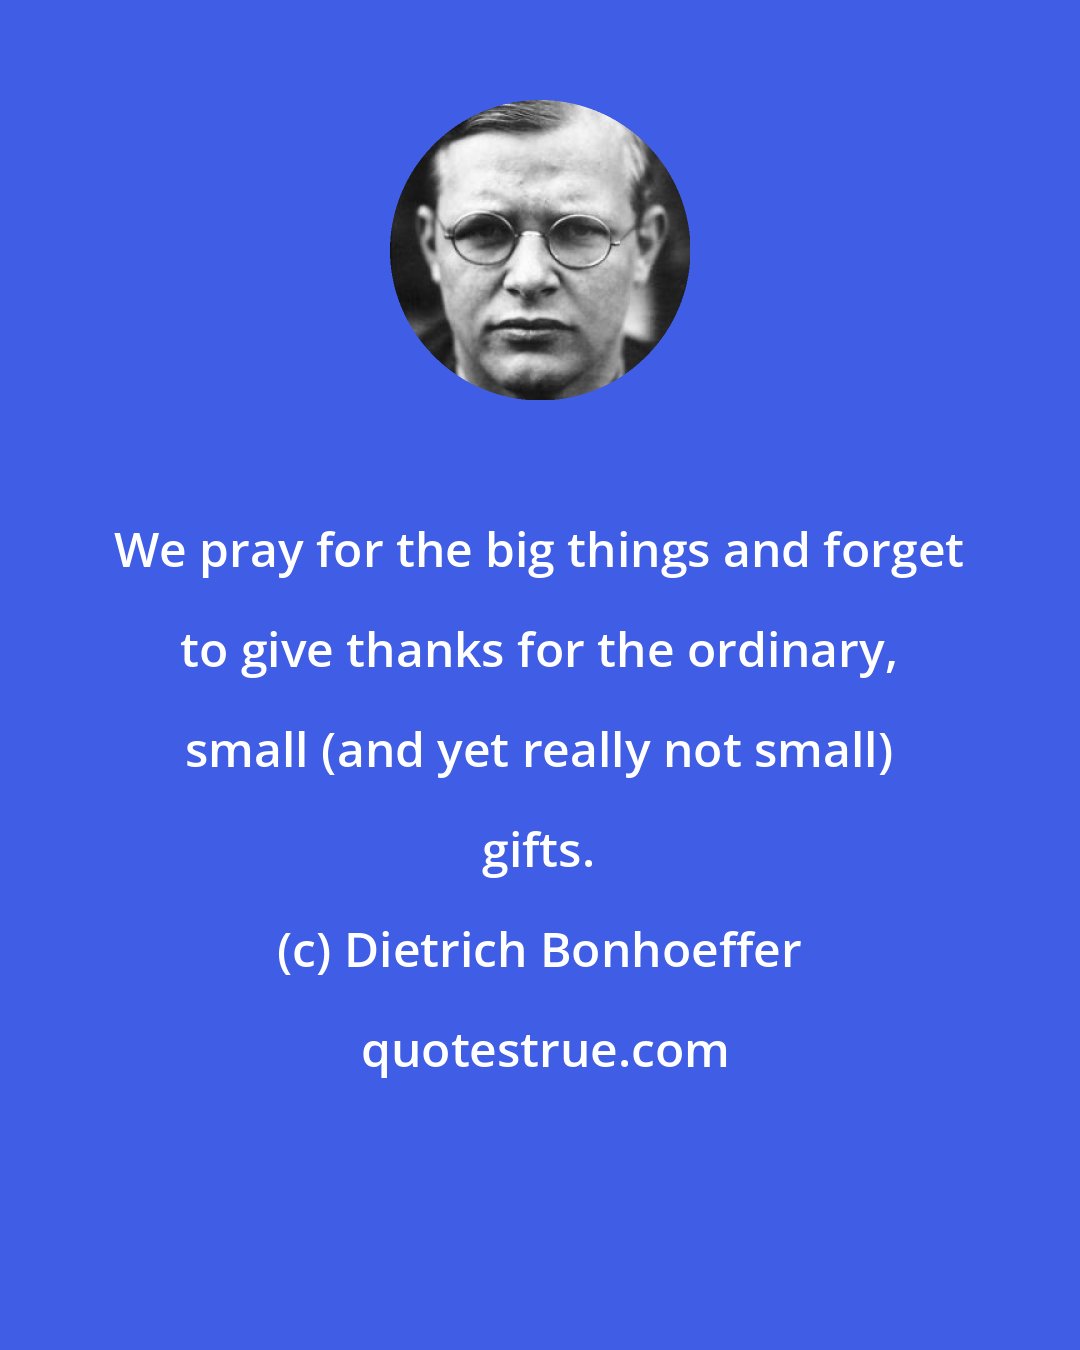 Dietrich Bonhoeffer: We pray for the big things and forget to give thanks for the ordinary, small (and yet really not small) gifts.